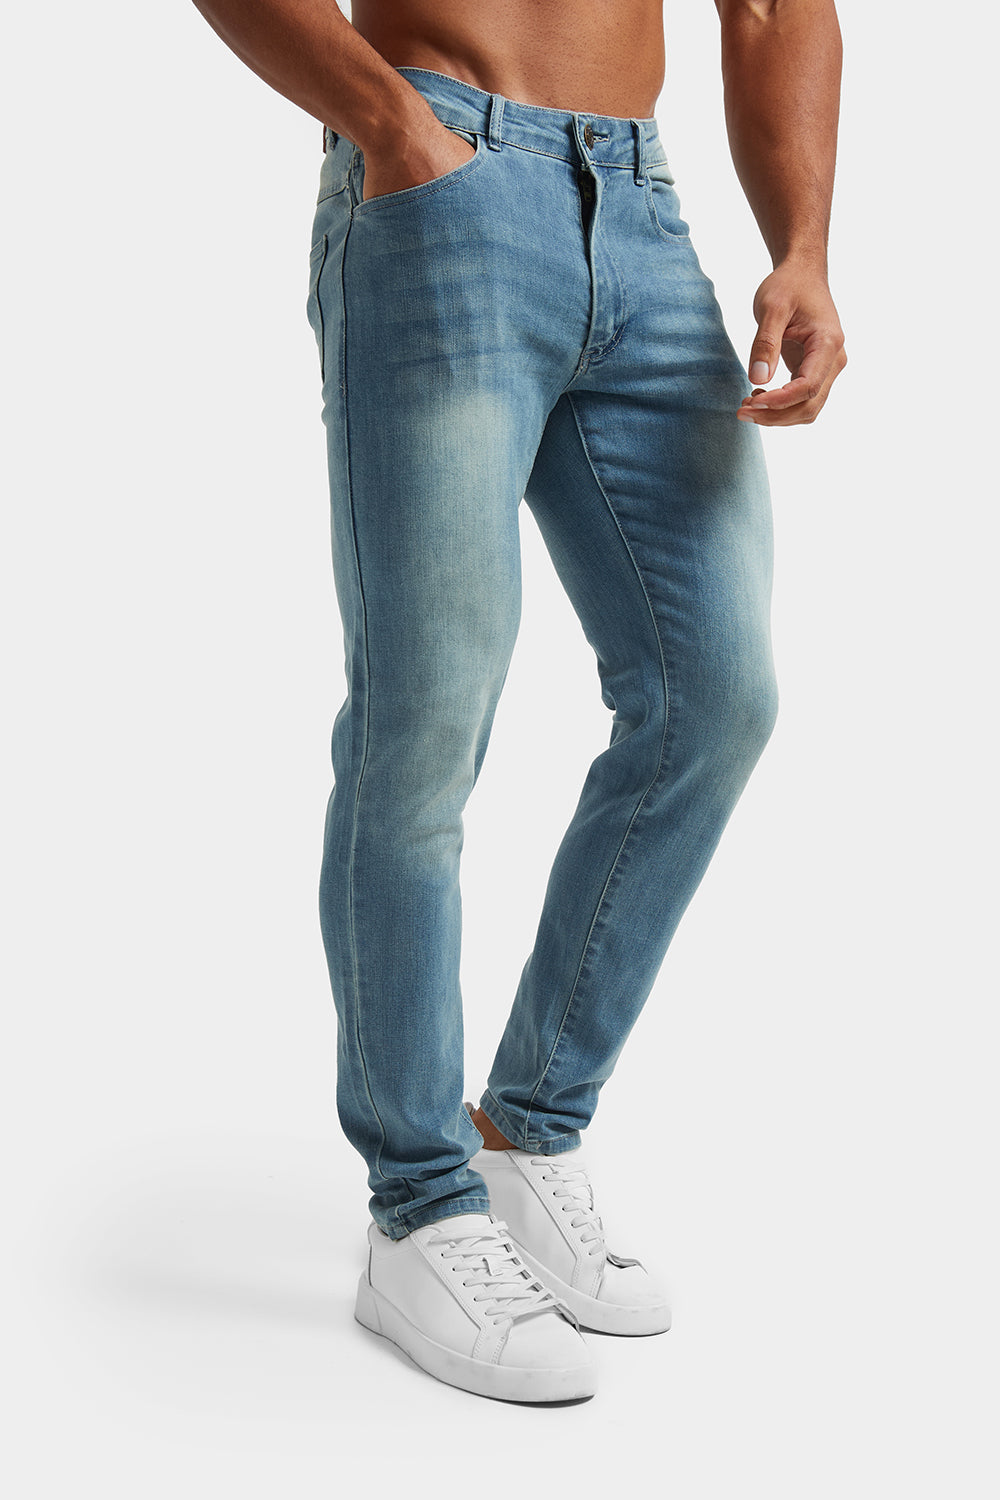 Buy Blue Jeans for Men by Xint Online | Ajio.com